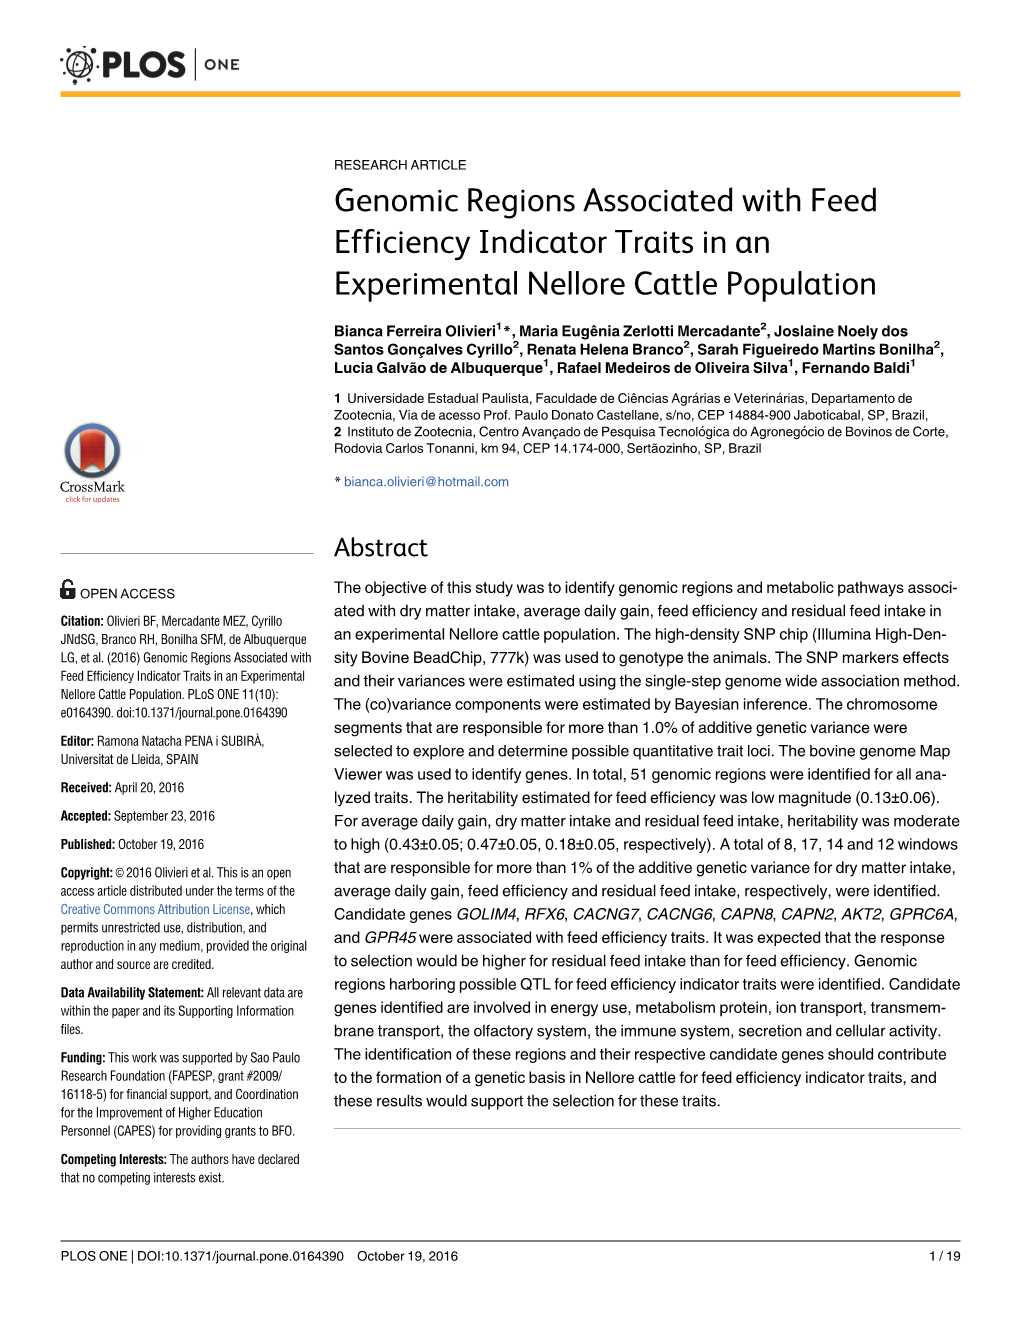 Genomic Regions Associated with Feed Efficiency Indicator Traits in an Experimental Nellore Cattle Population